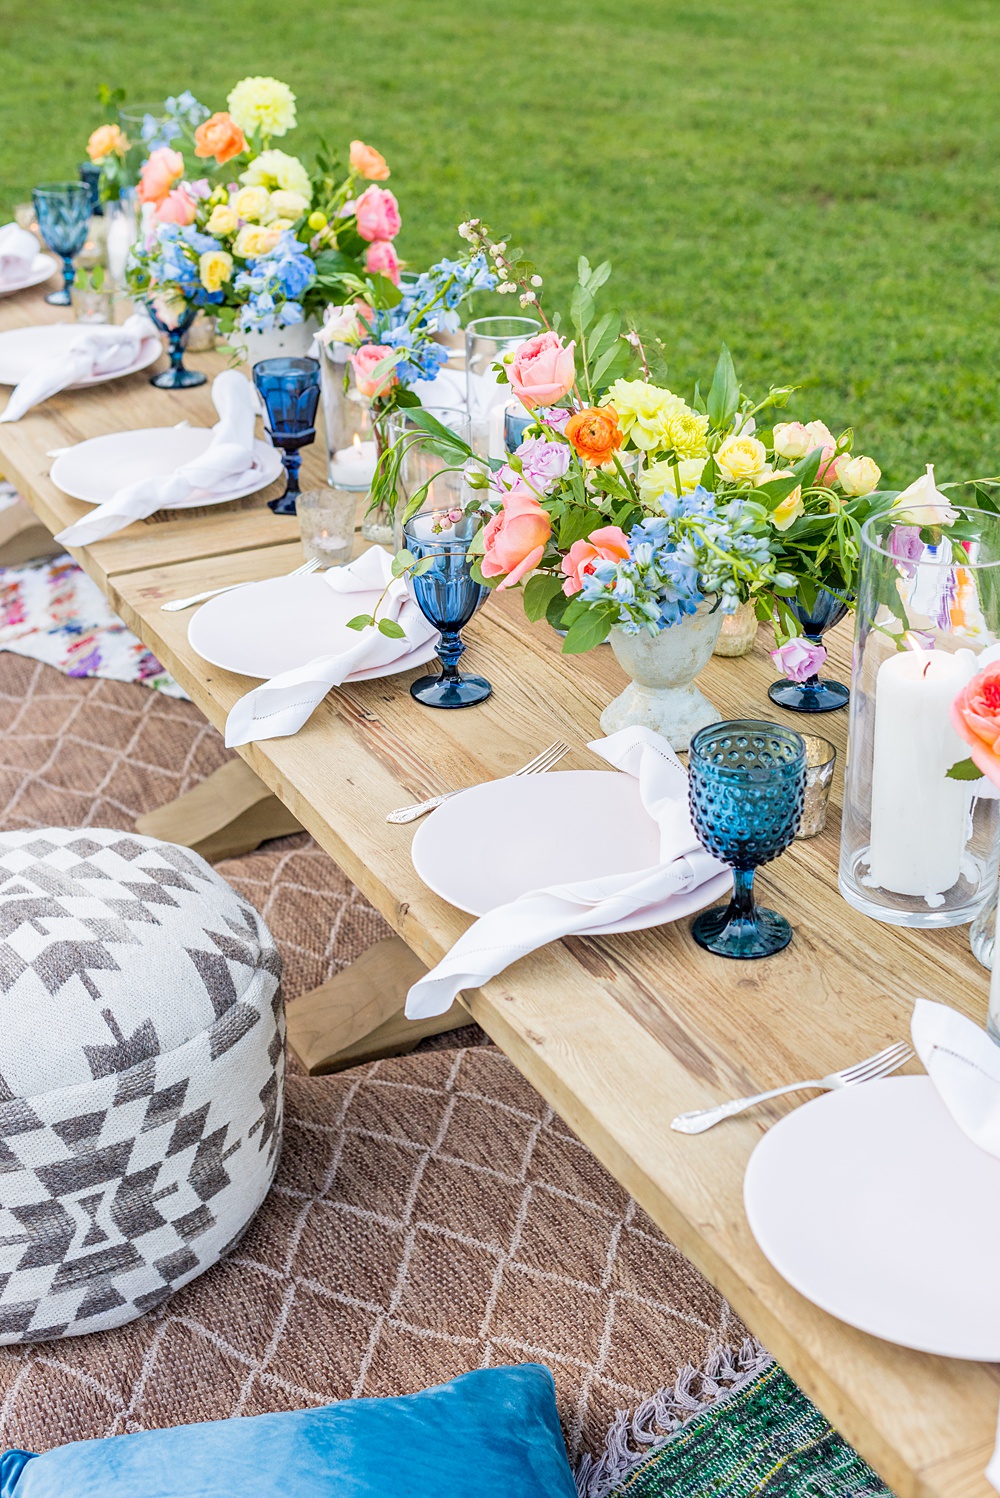 Step inside this colorful outdoor bohemian thirtieth birthday party. Full of color, lush garden flowers, and the yummiest vegan unicorn confetti cakes you ever did find! Click through for the details. Mikkel Paige Photography #gardenparty #bohemianparty #unicornparty #styledshoot #backyardparty #flowers | glitterinc.com | @glitterinc